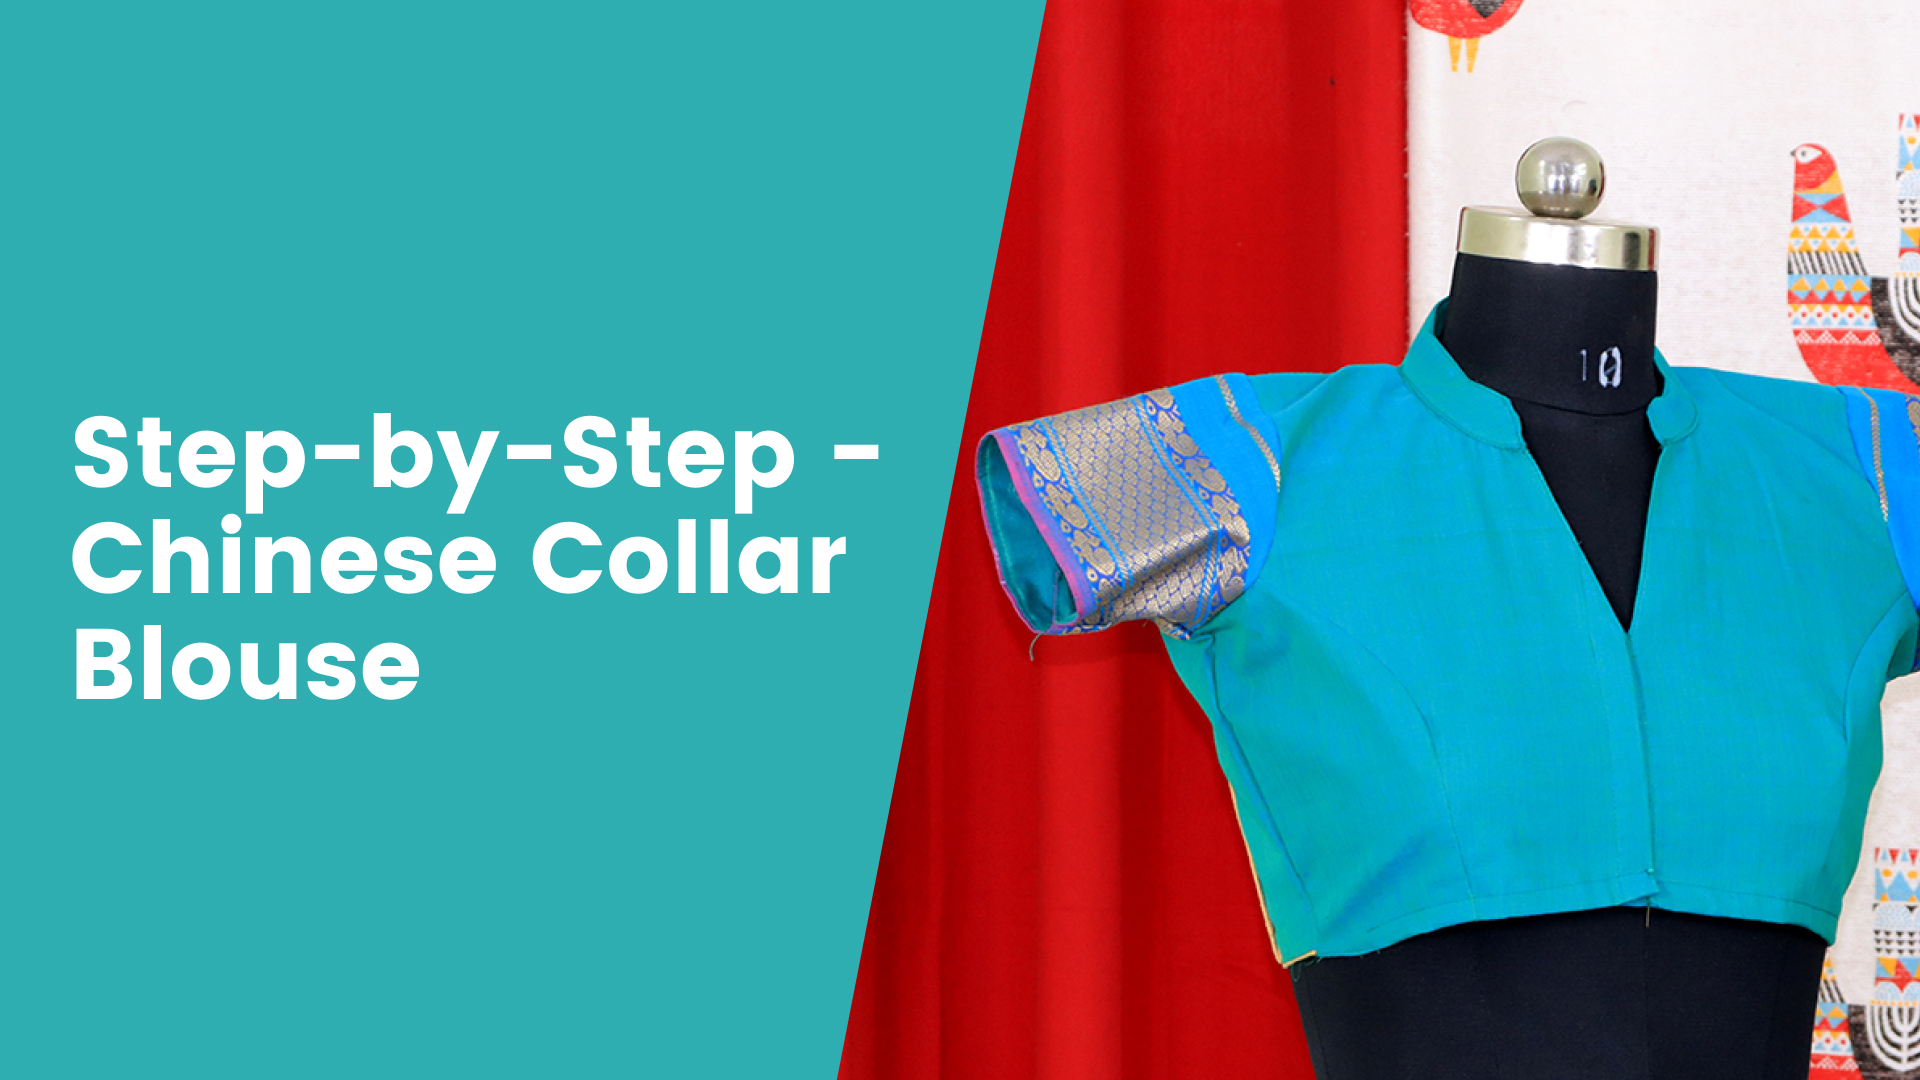 Course Trailer: How to Stitch a Chinese Collar Blouse?. Watch to know more.